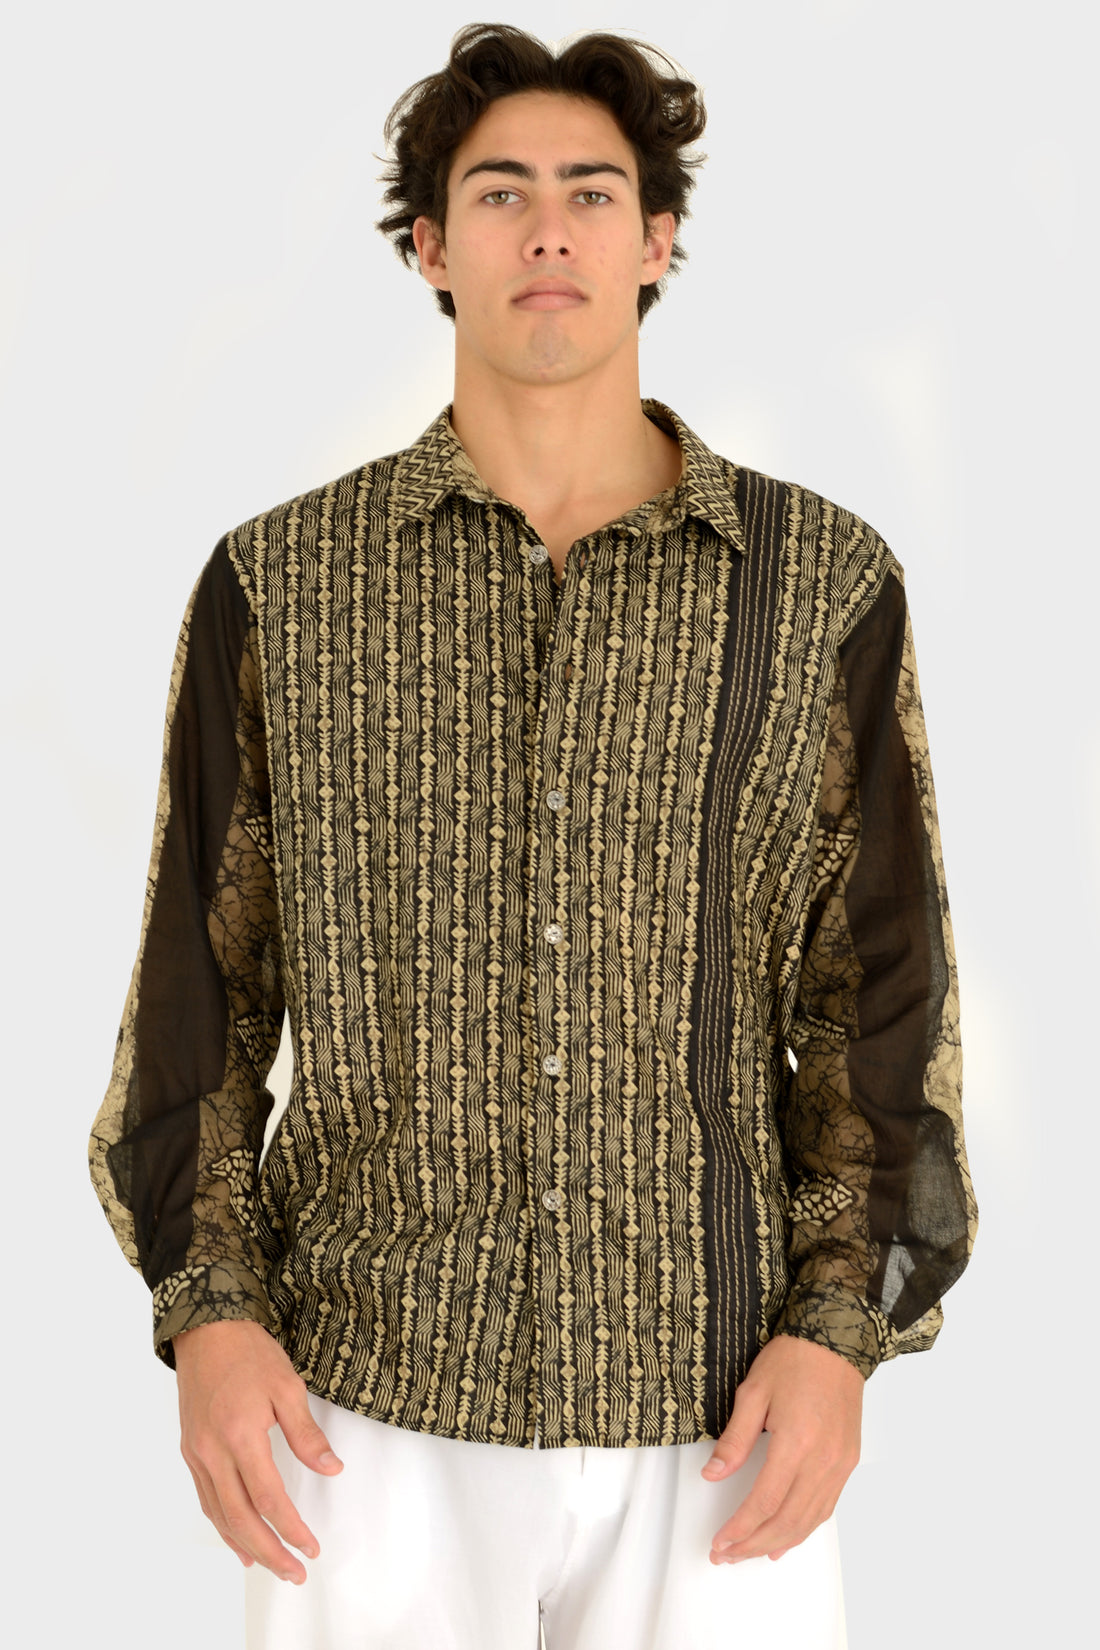 Enzo - Cotton Suit Long Sleeves Shirts With Hand Carved Bone Buttons (7390309318852)